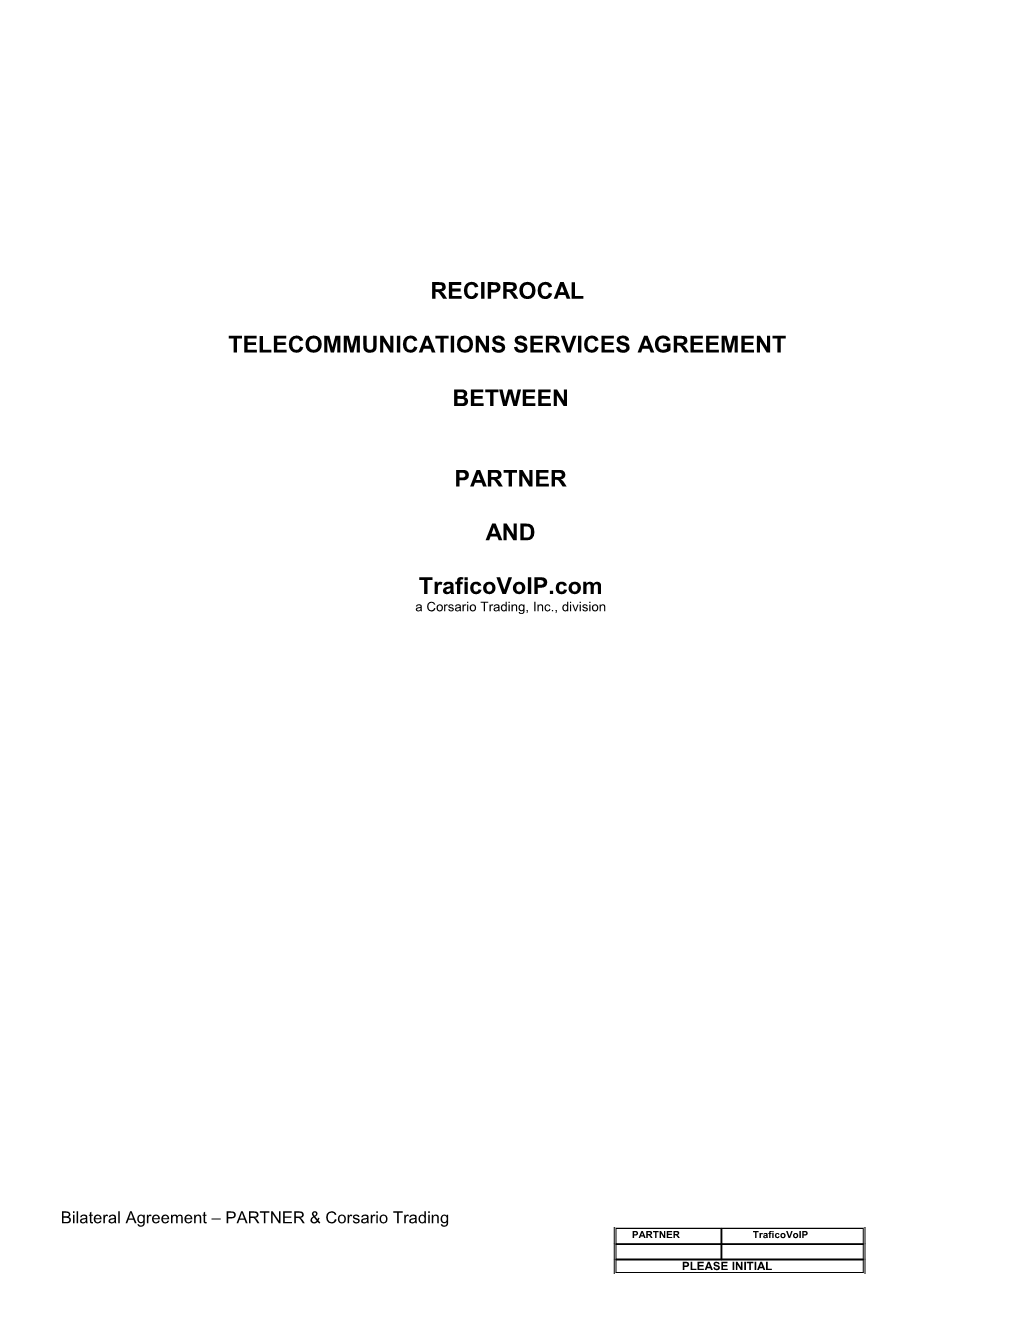 Reciprocal Telecommunications Services Agreement